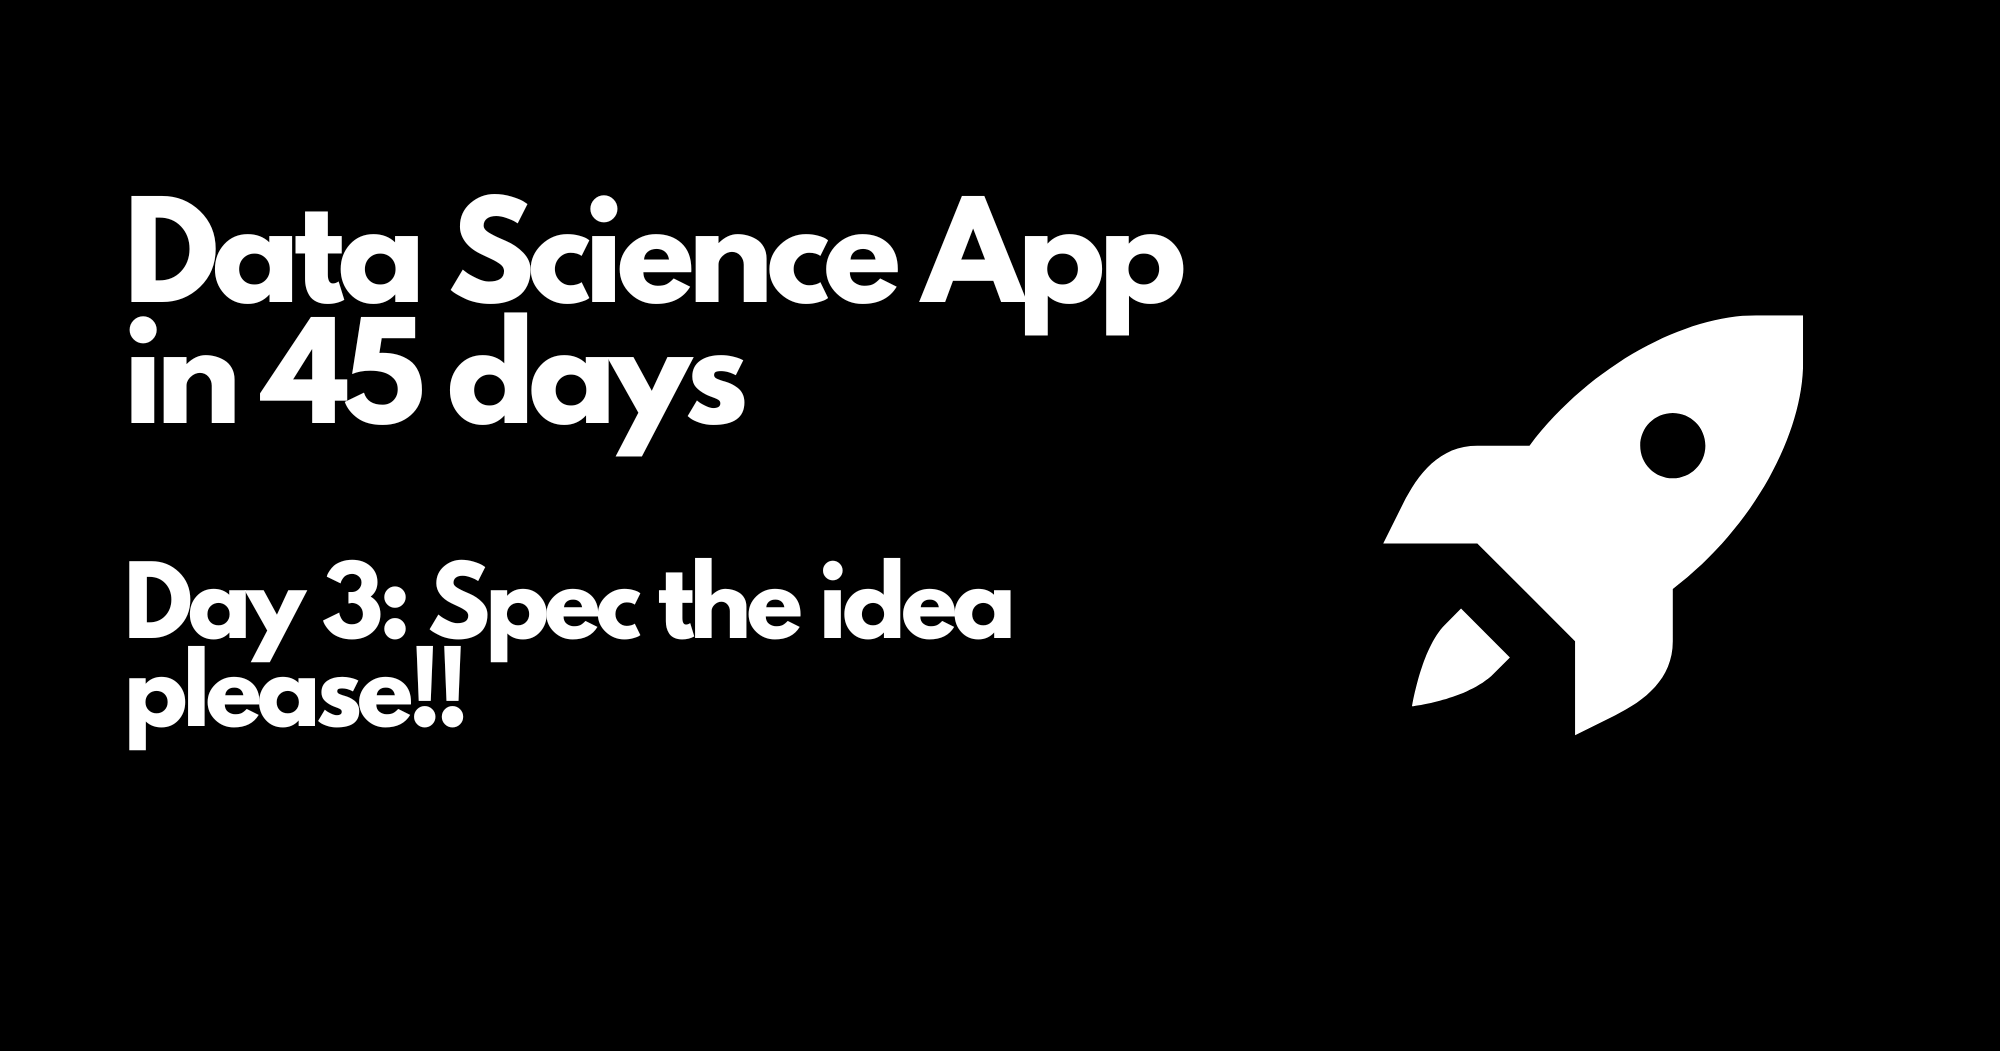 Day 3 - Data Science App in 45 days - Spec the idea please!!